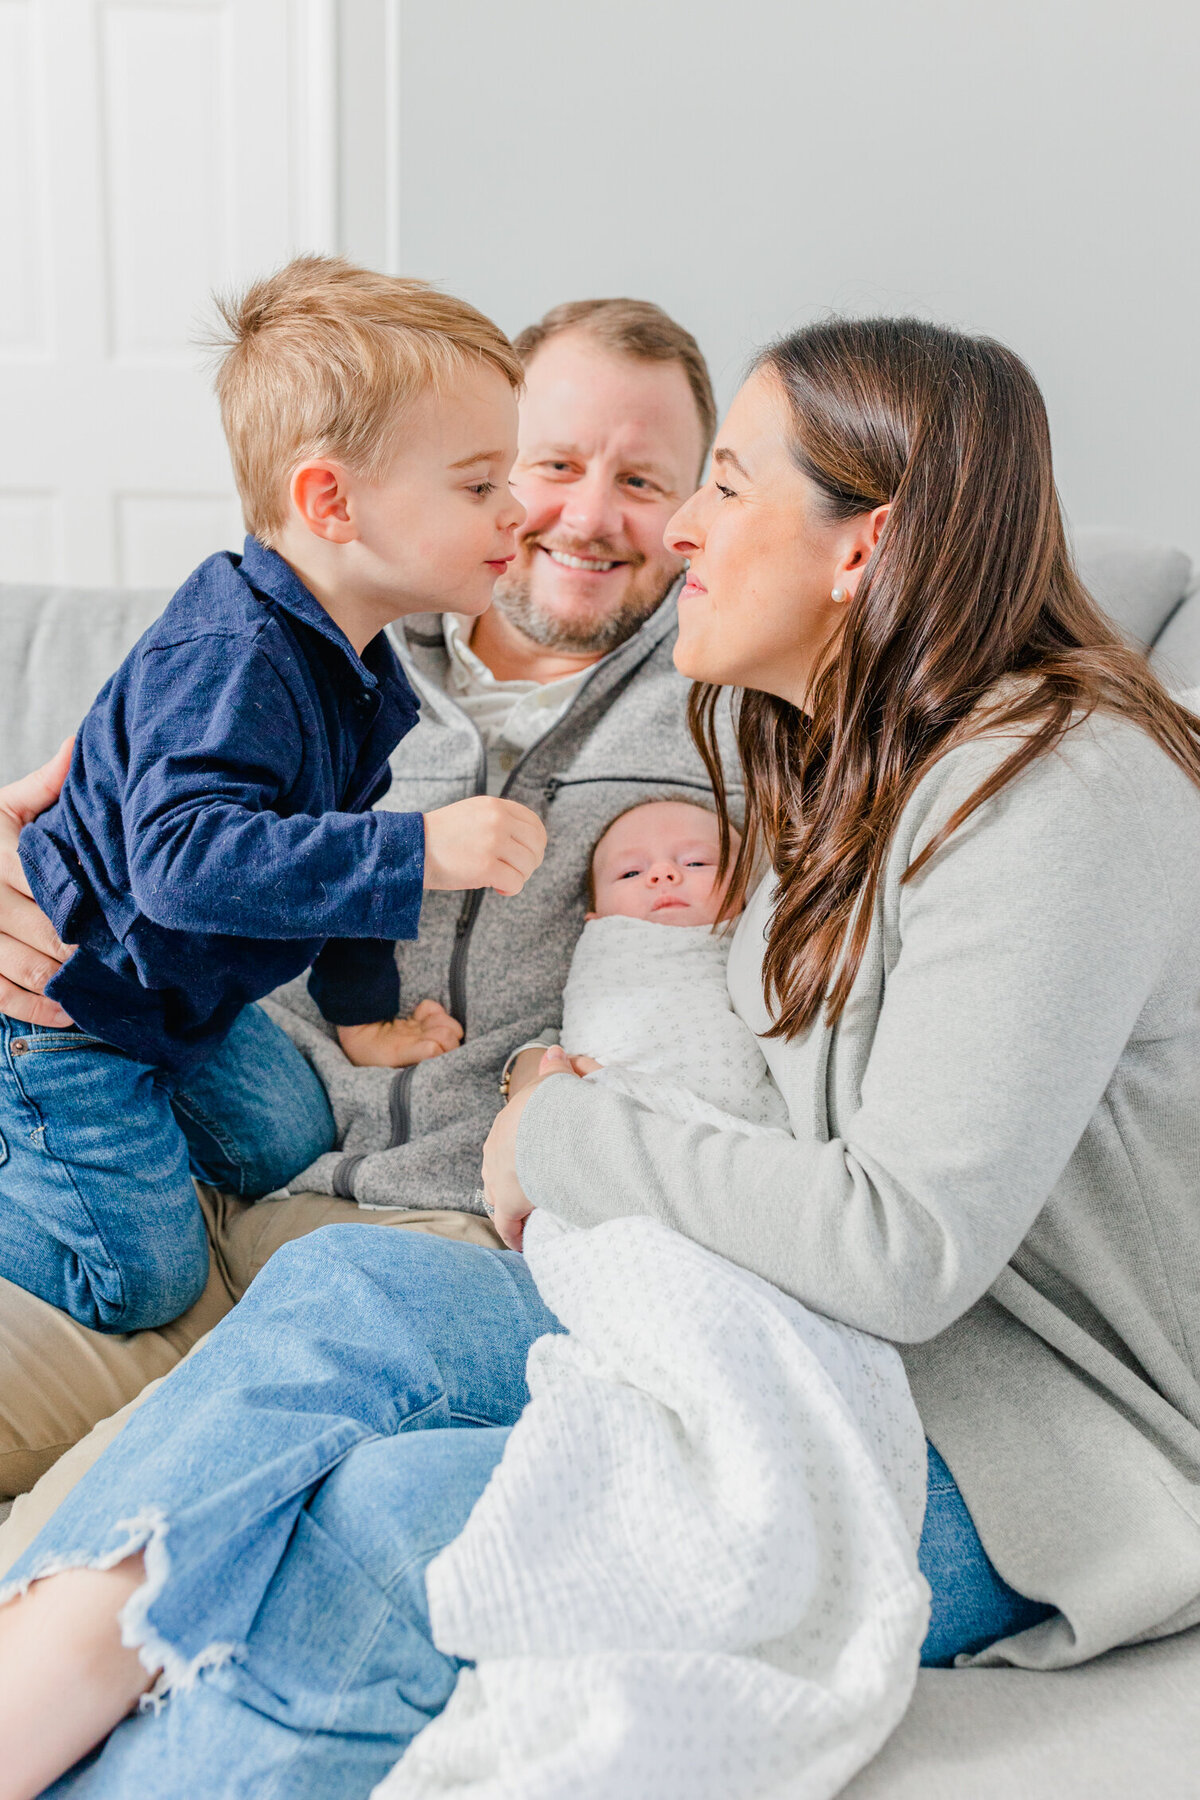 Family of four on a grey couch; dad is smiling from behind while toddler leans in to kiss his mama, who is holding a newborn baby in her lap